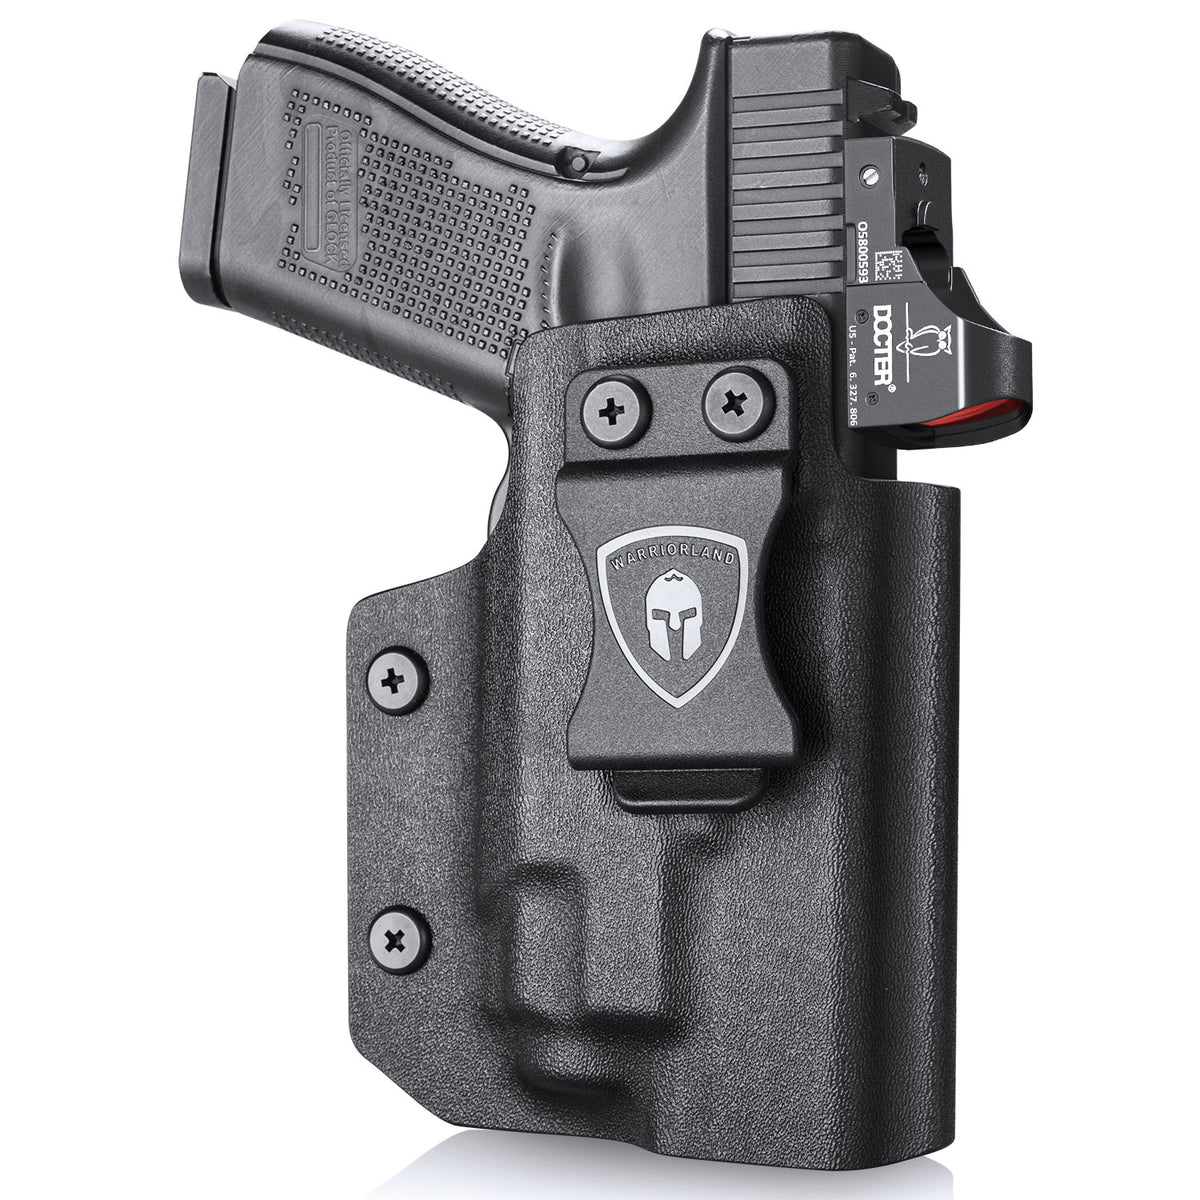 Glock 19 TLR7/TLR7A Holster IWB Kydex Holster Optic Cut Fit: Glock 17 19 19X 44 45 Gen 3-5 & Glock 23 32 Gen 3-4, Conceal Carry, Right Hand